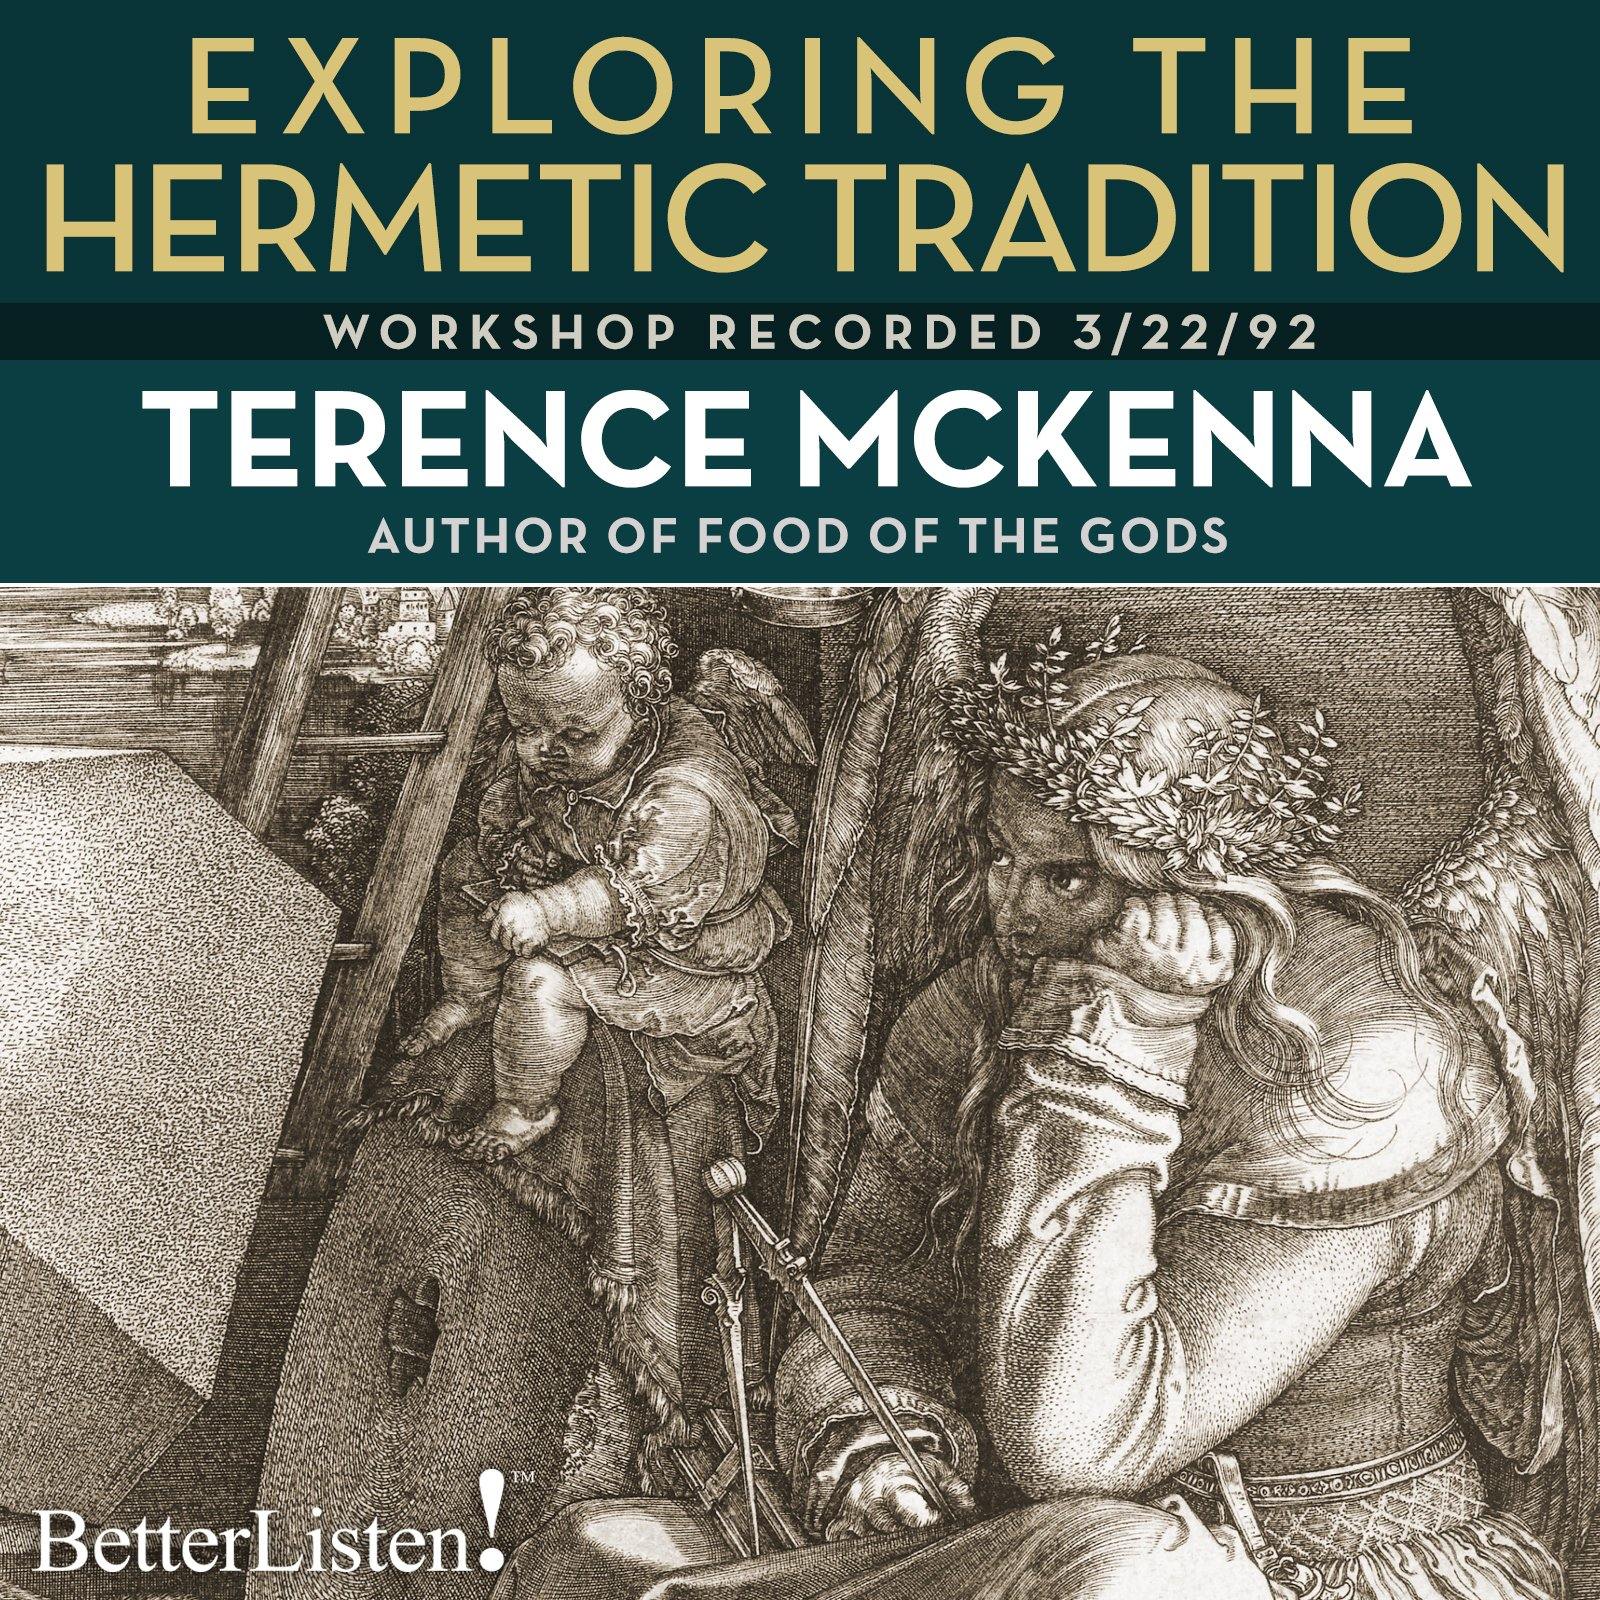 Exploring the Hermetic Tradition with Terence McKenna Audio Program Terence McKenna - BetterListen!